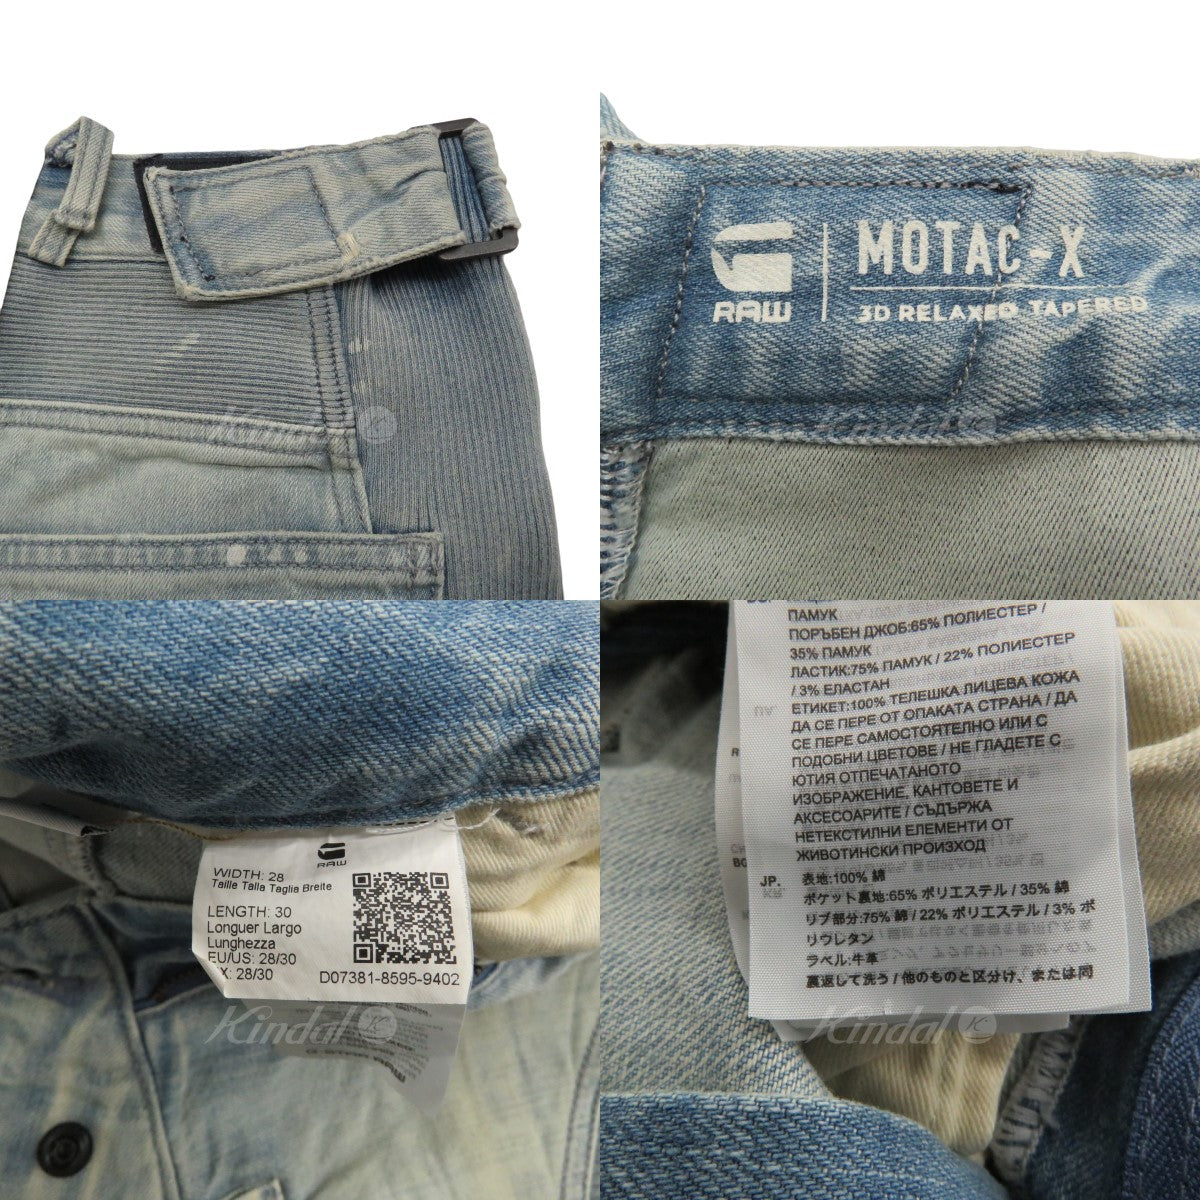 G-STAR RAW(ジースター・ロウ) MOTAC-X 3D RELAXED TAPERED 切替デニム ...